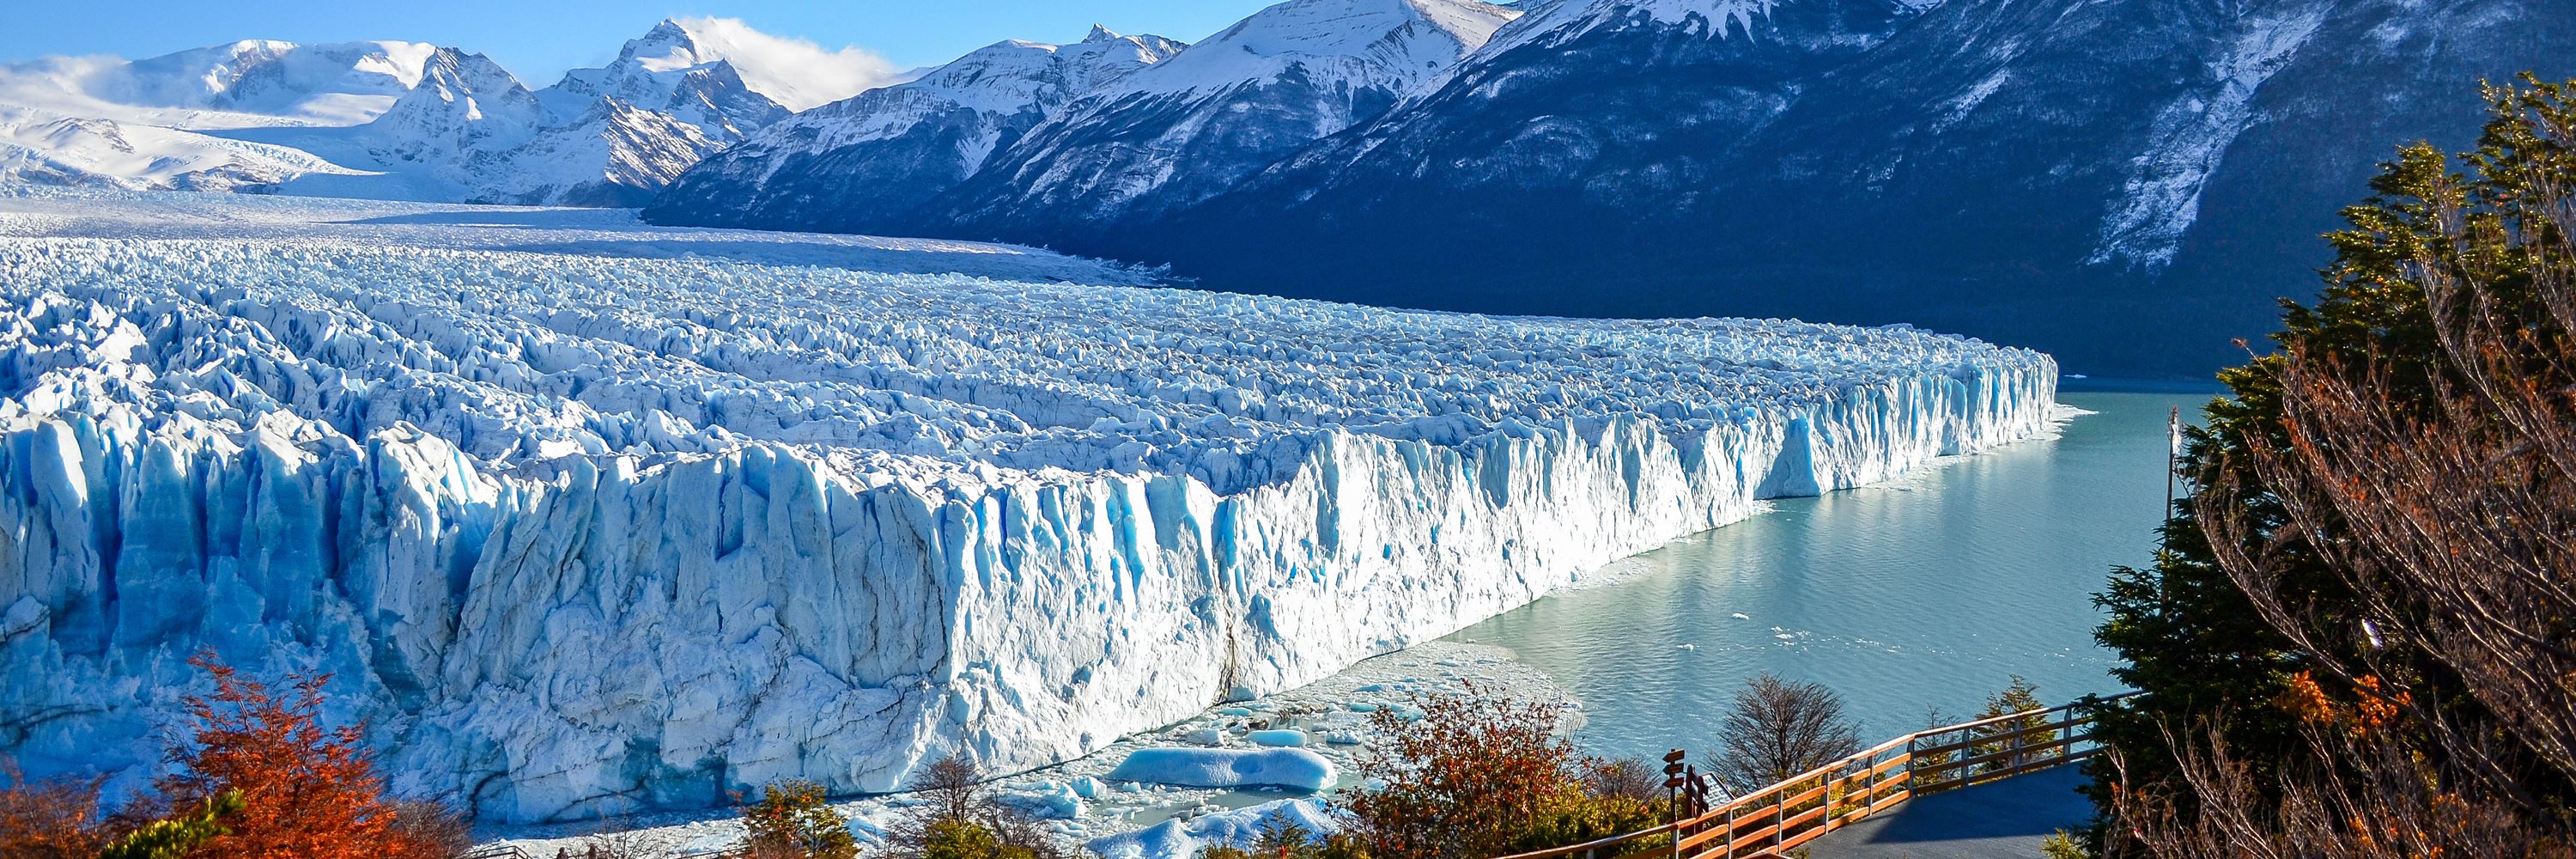 Patagonia highlights guide | Audley Travel UK